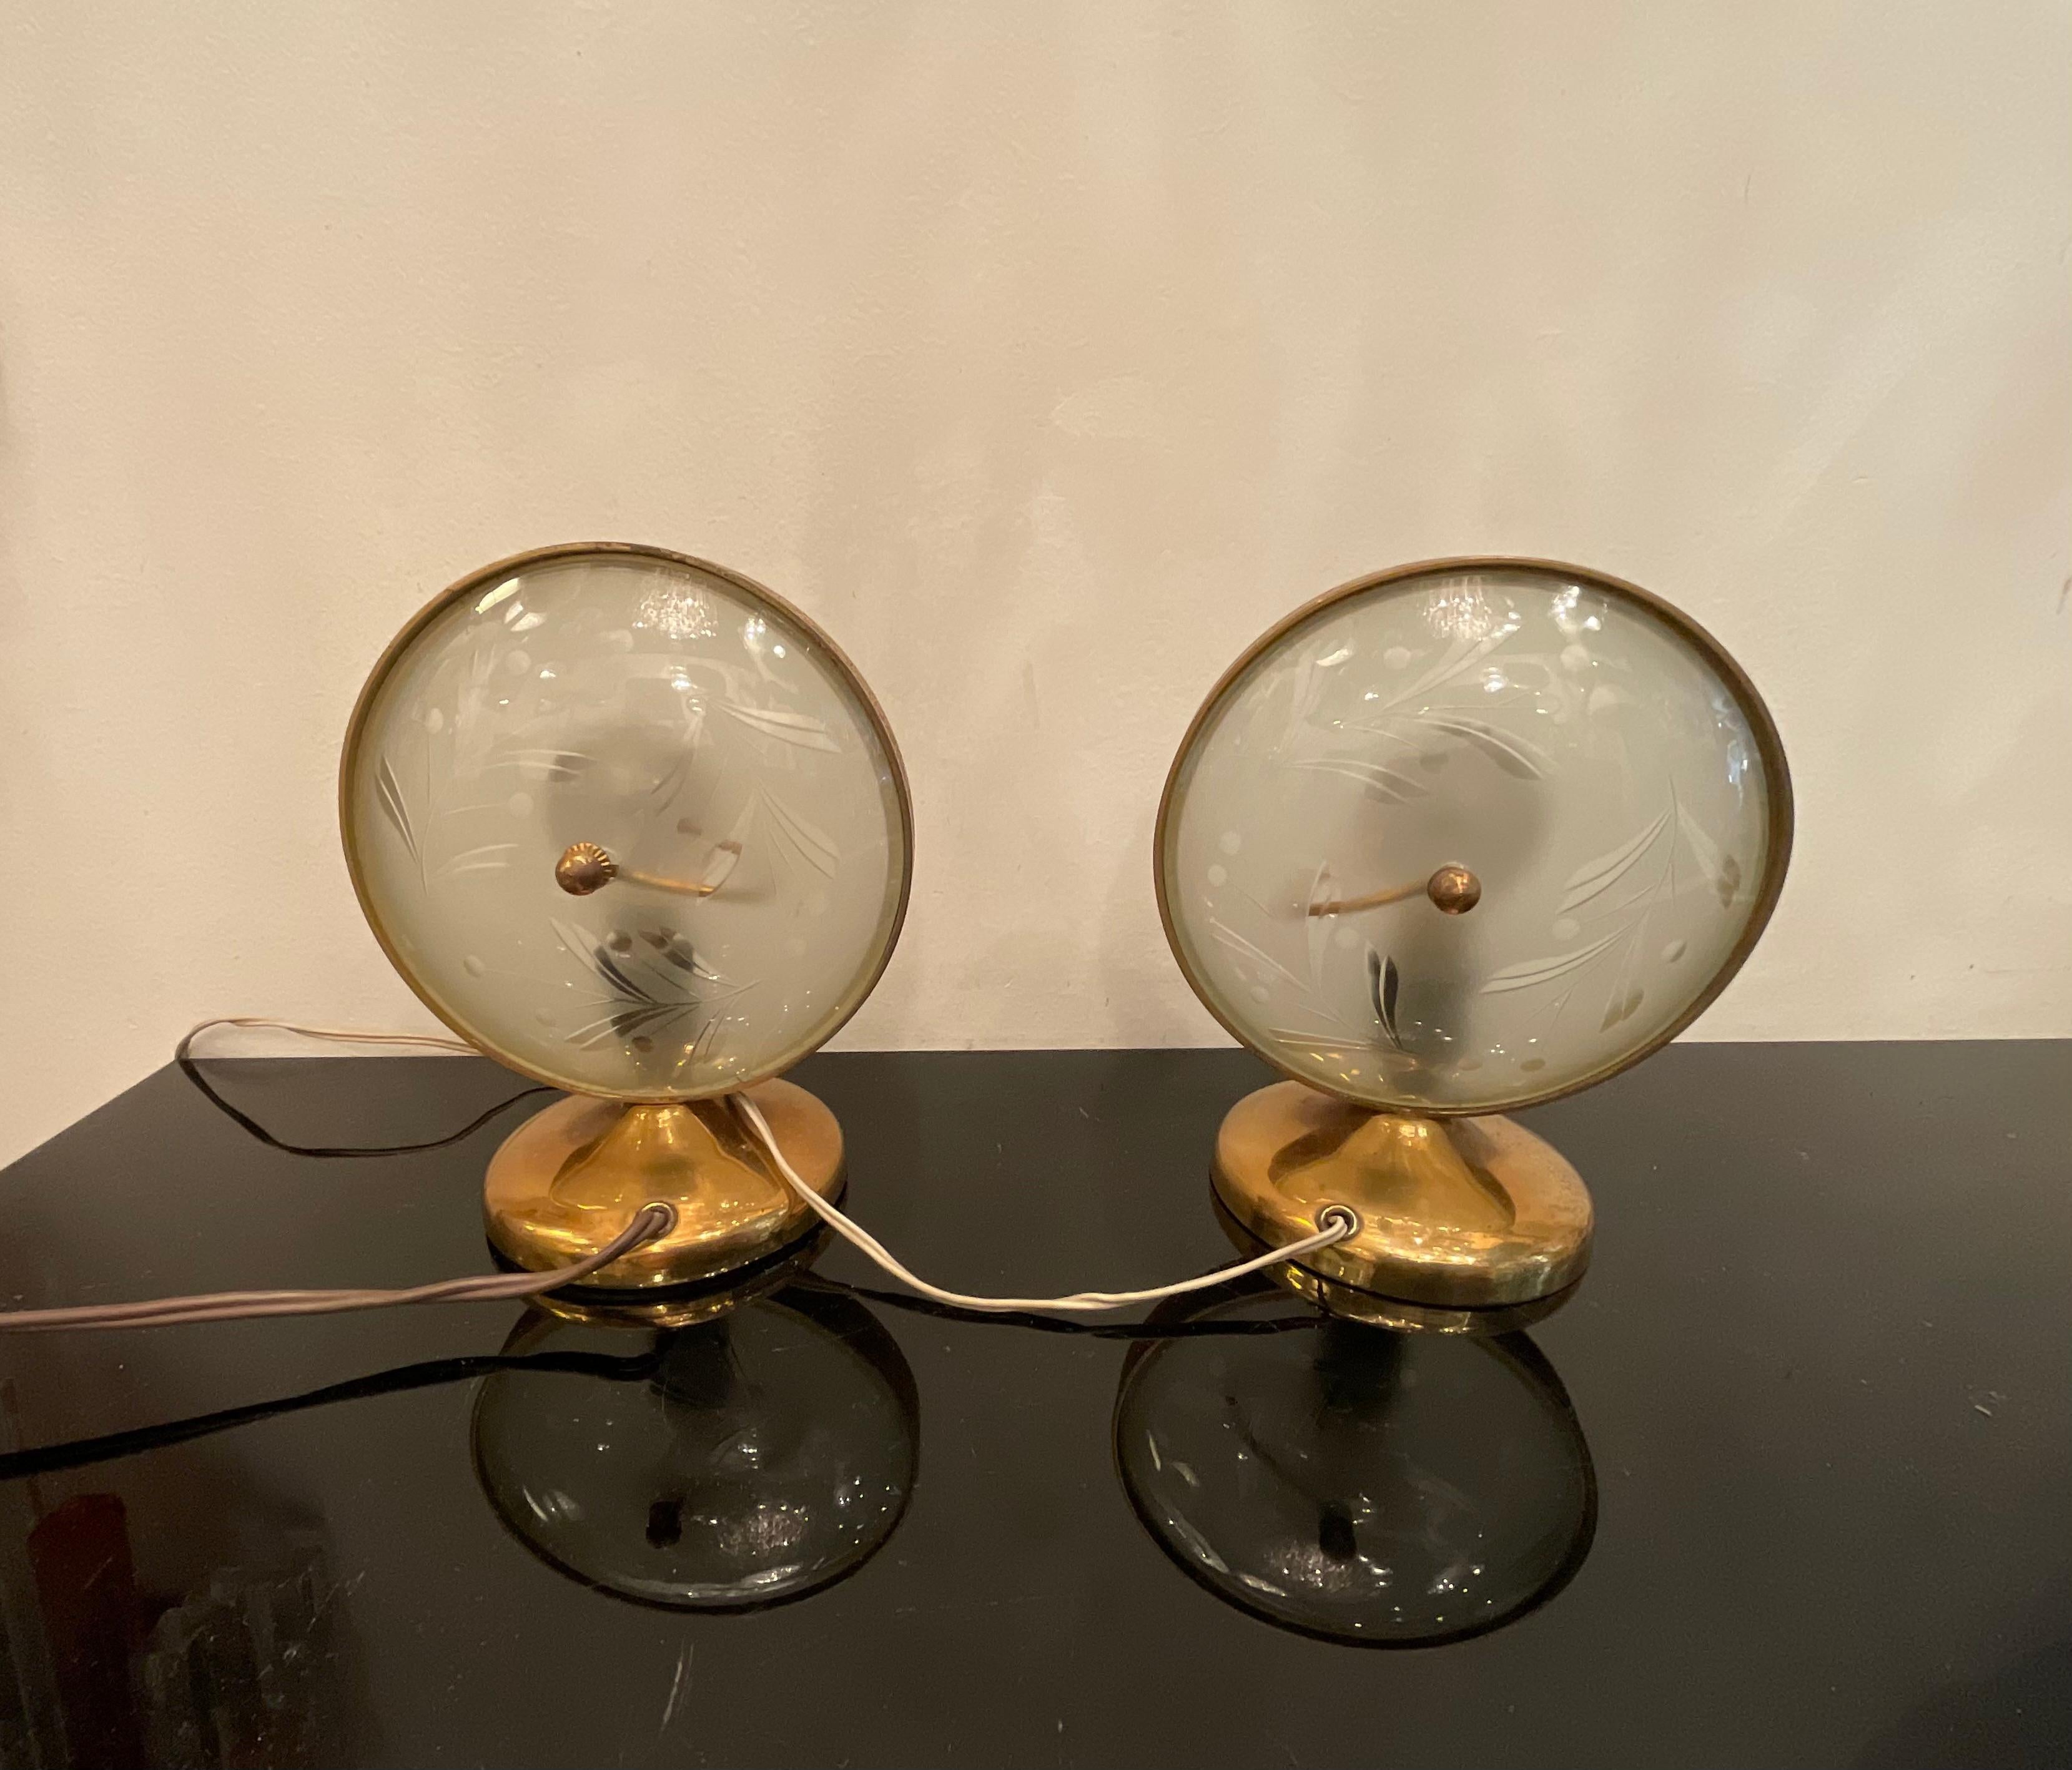 FONTANARTE - Pietro Chiesa - Pair of lamps 1950s For Sale 7